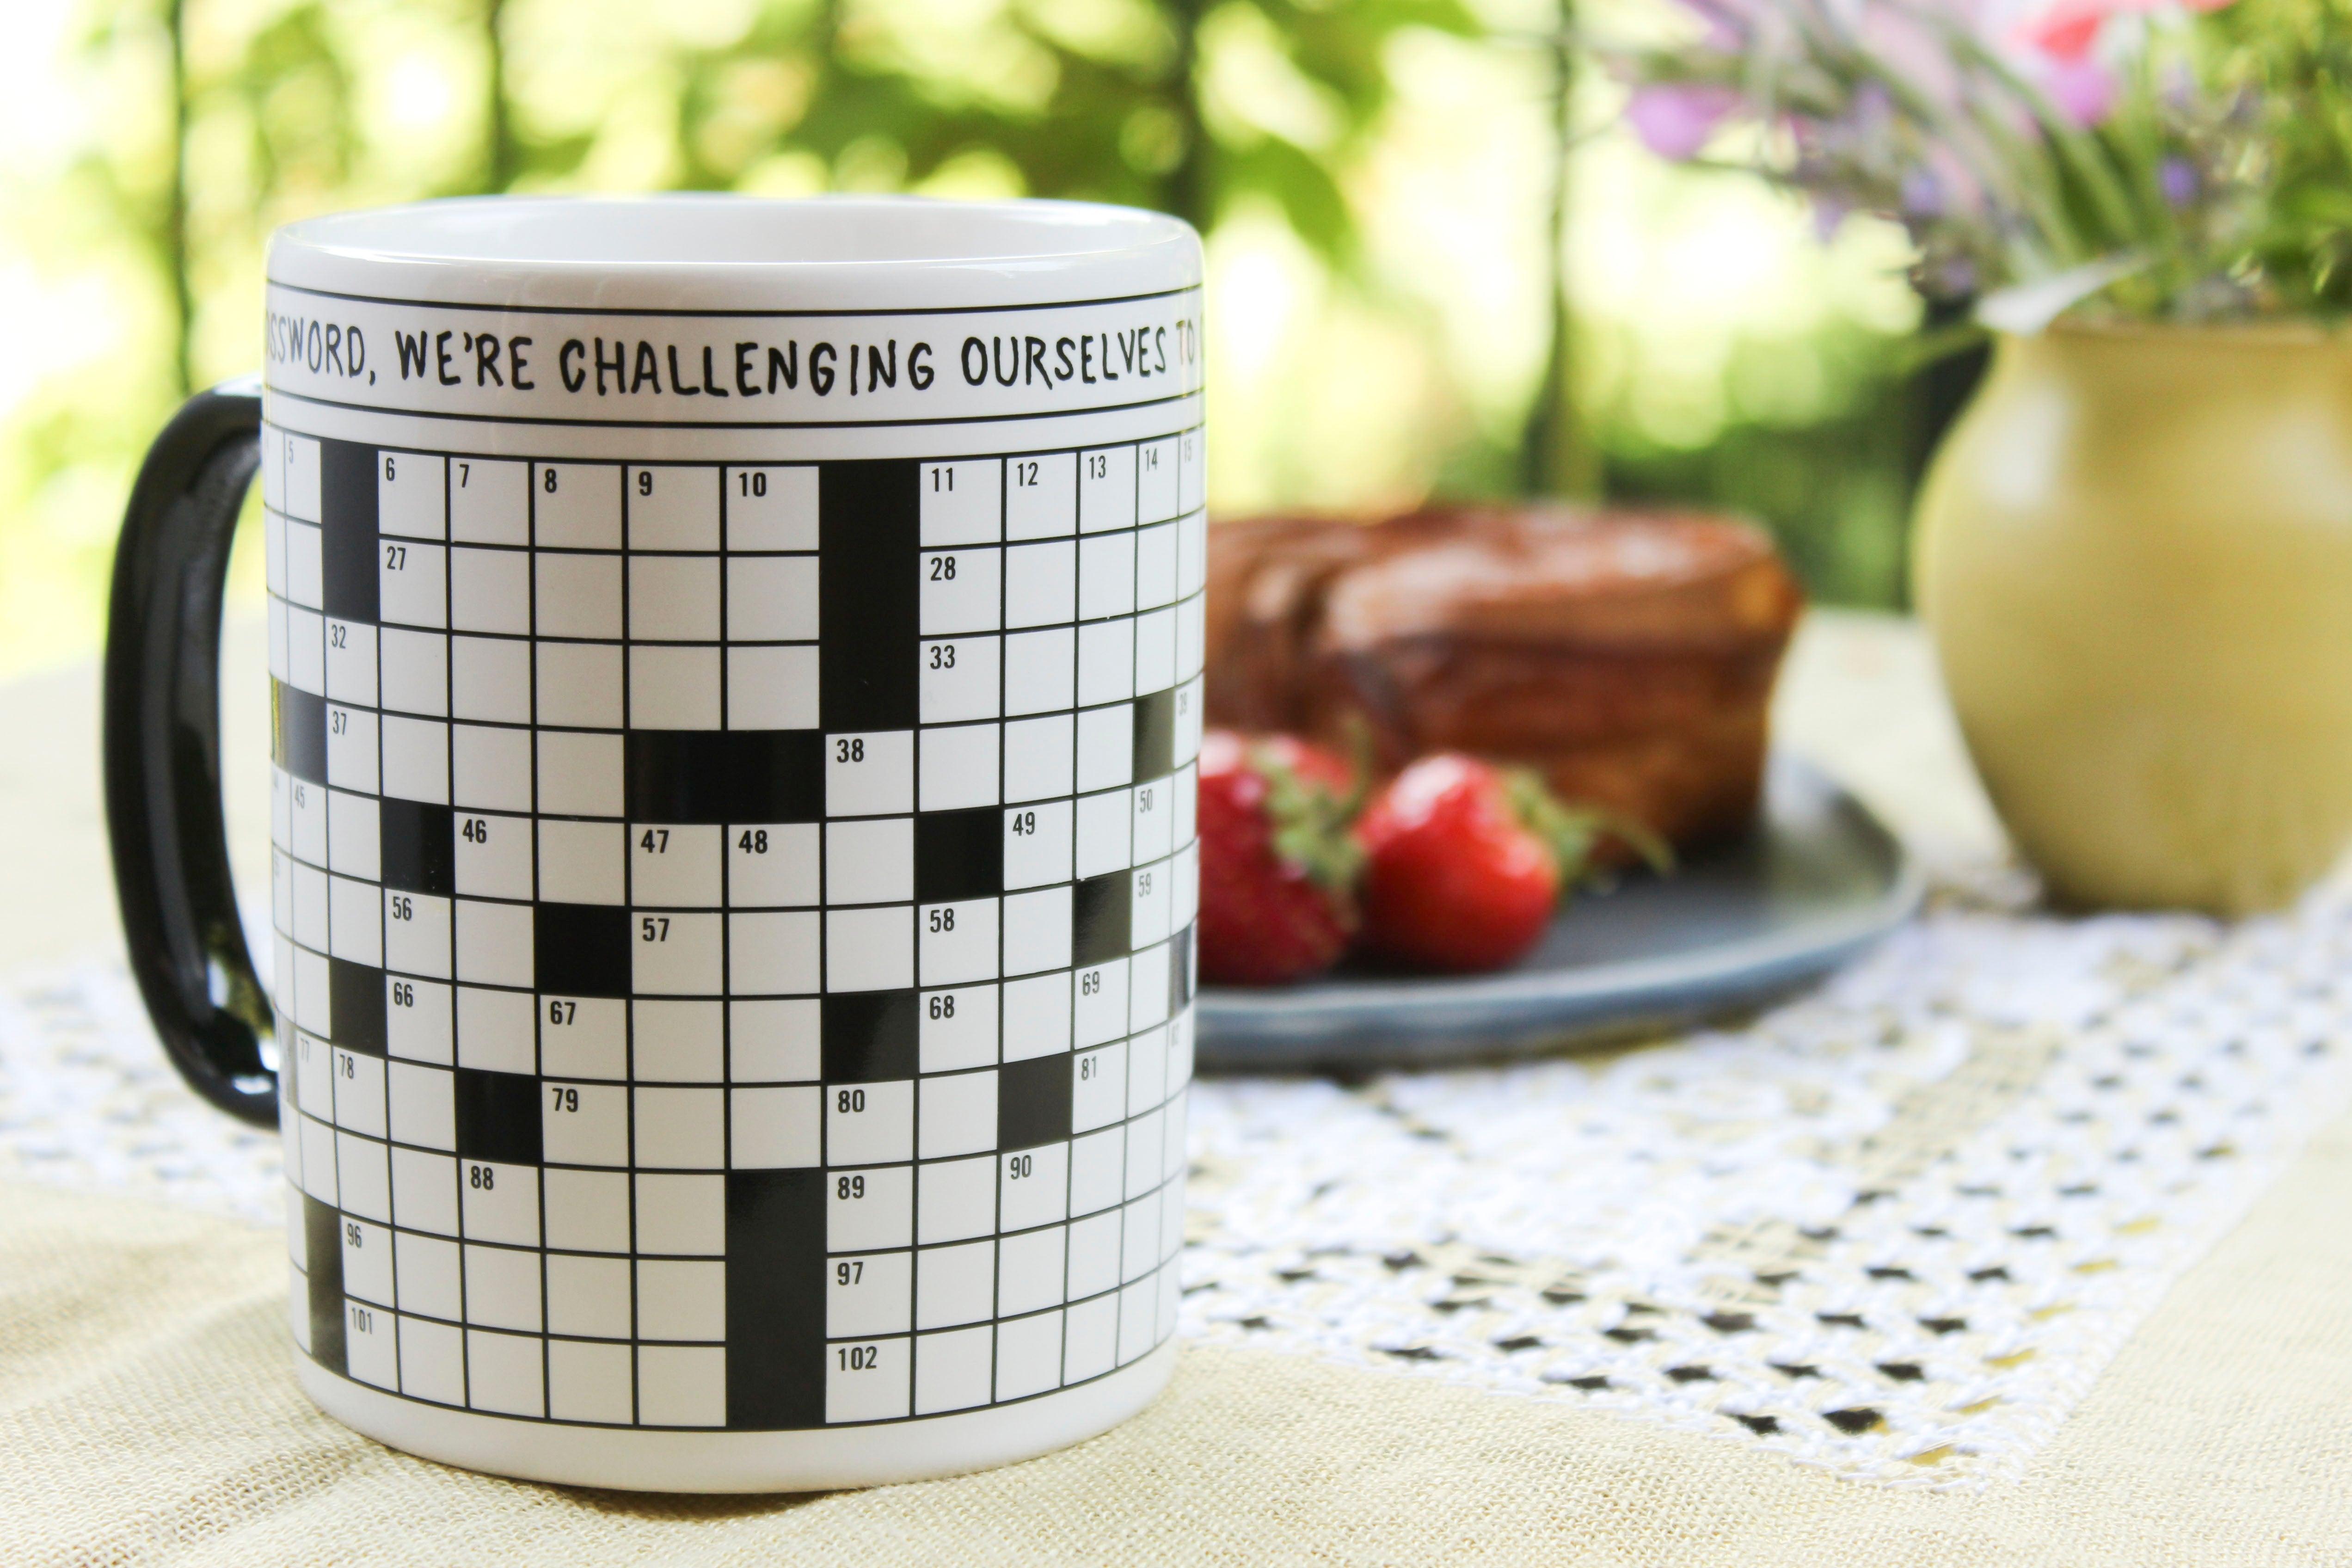 Crossword Puzzle Mug Smart and Funny Gifts by UPG The Unemployed